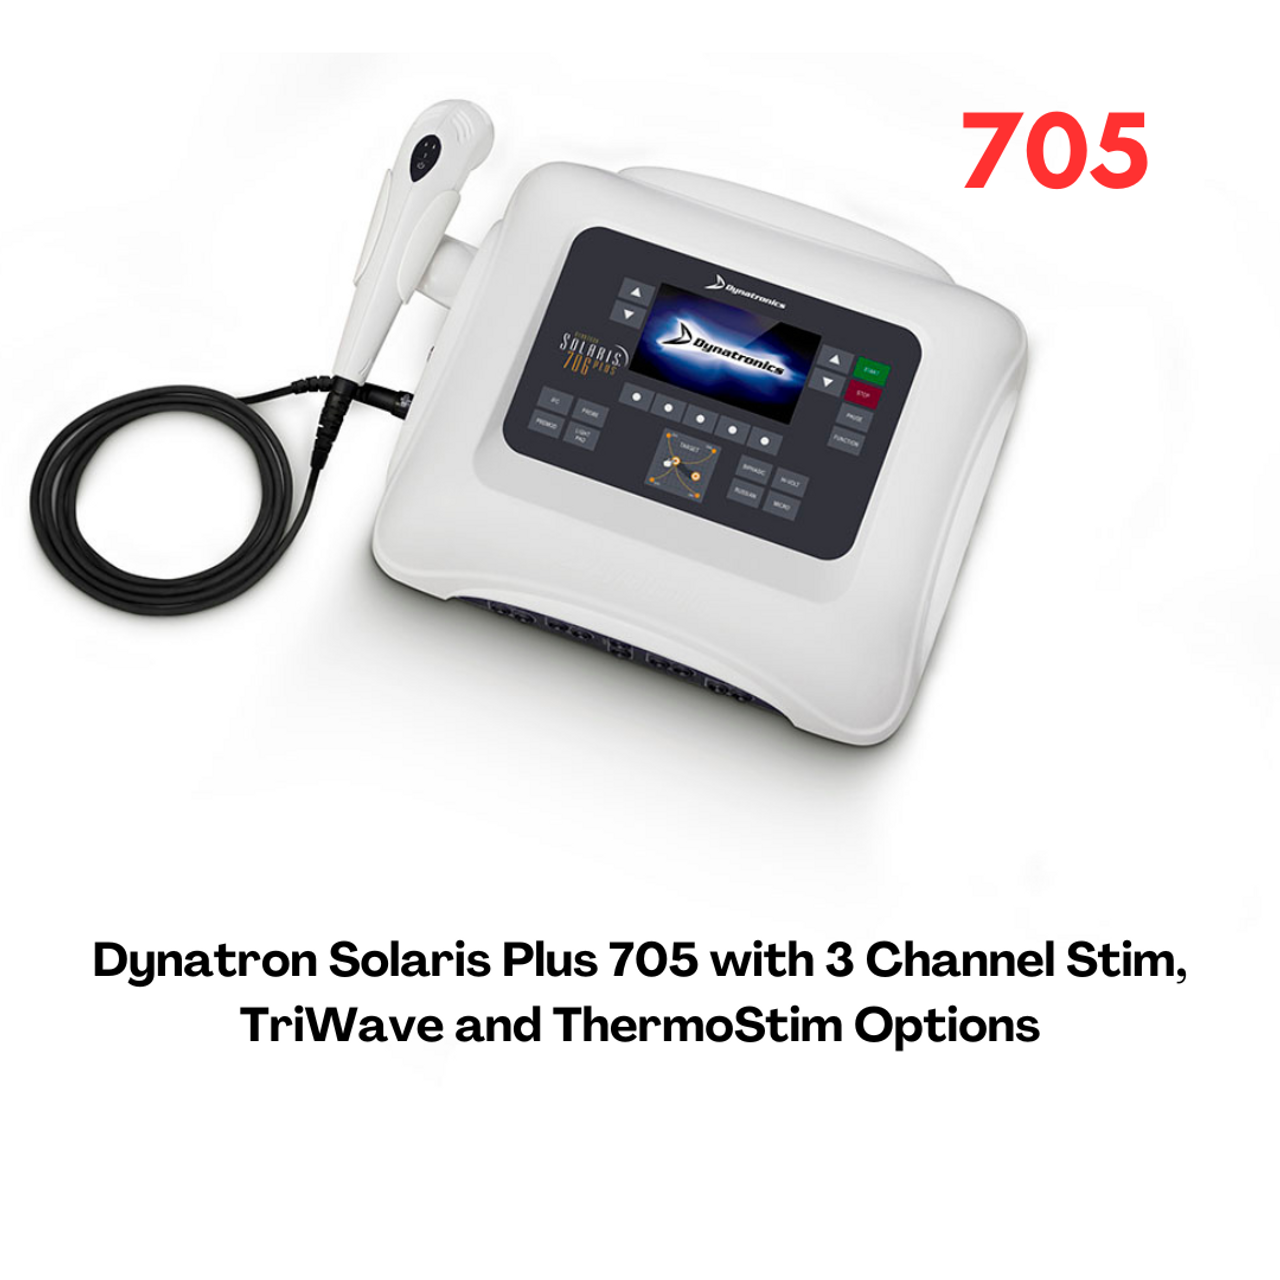 https://cdn11.bigcommerce.com/s-13ttxa/images/stencil/1280x1280/products/21881/24965/Dynatron_Solaris_Plus_705_with_3_Channel_Stim_TriWave_and_ThermoStim_Options__27761.1678301434.png?c=2